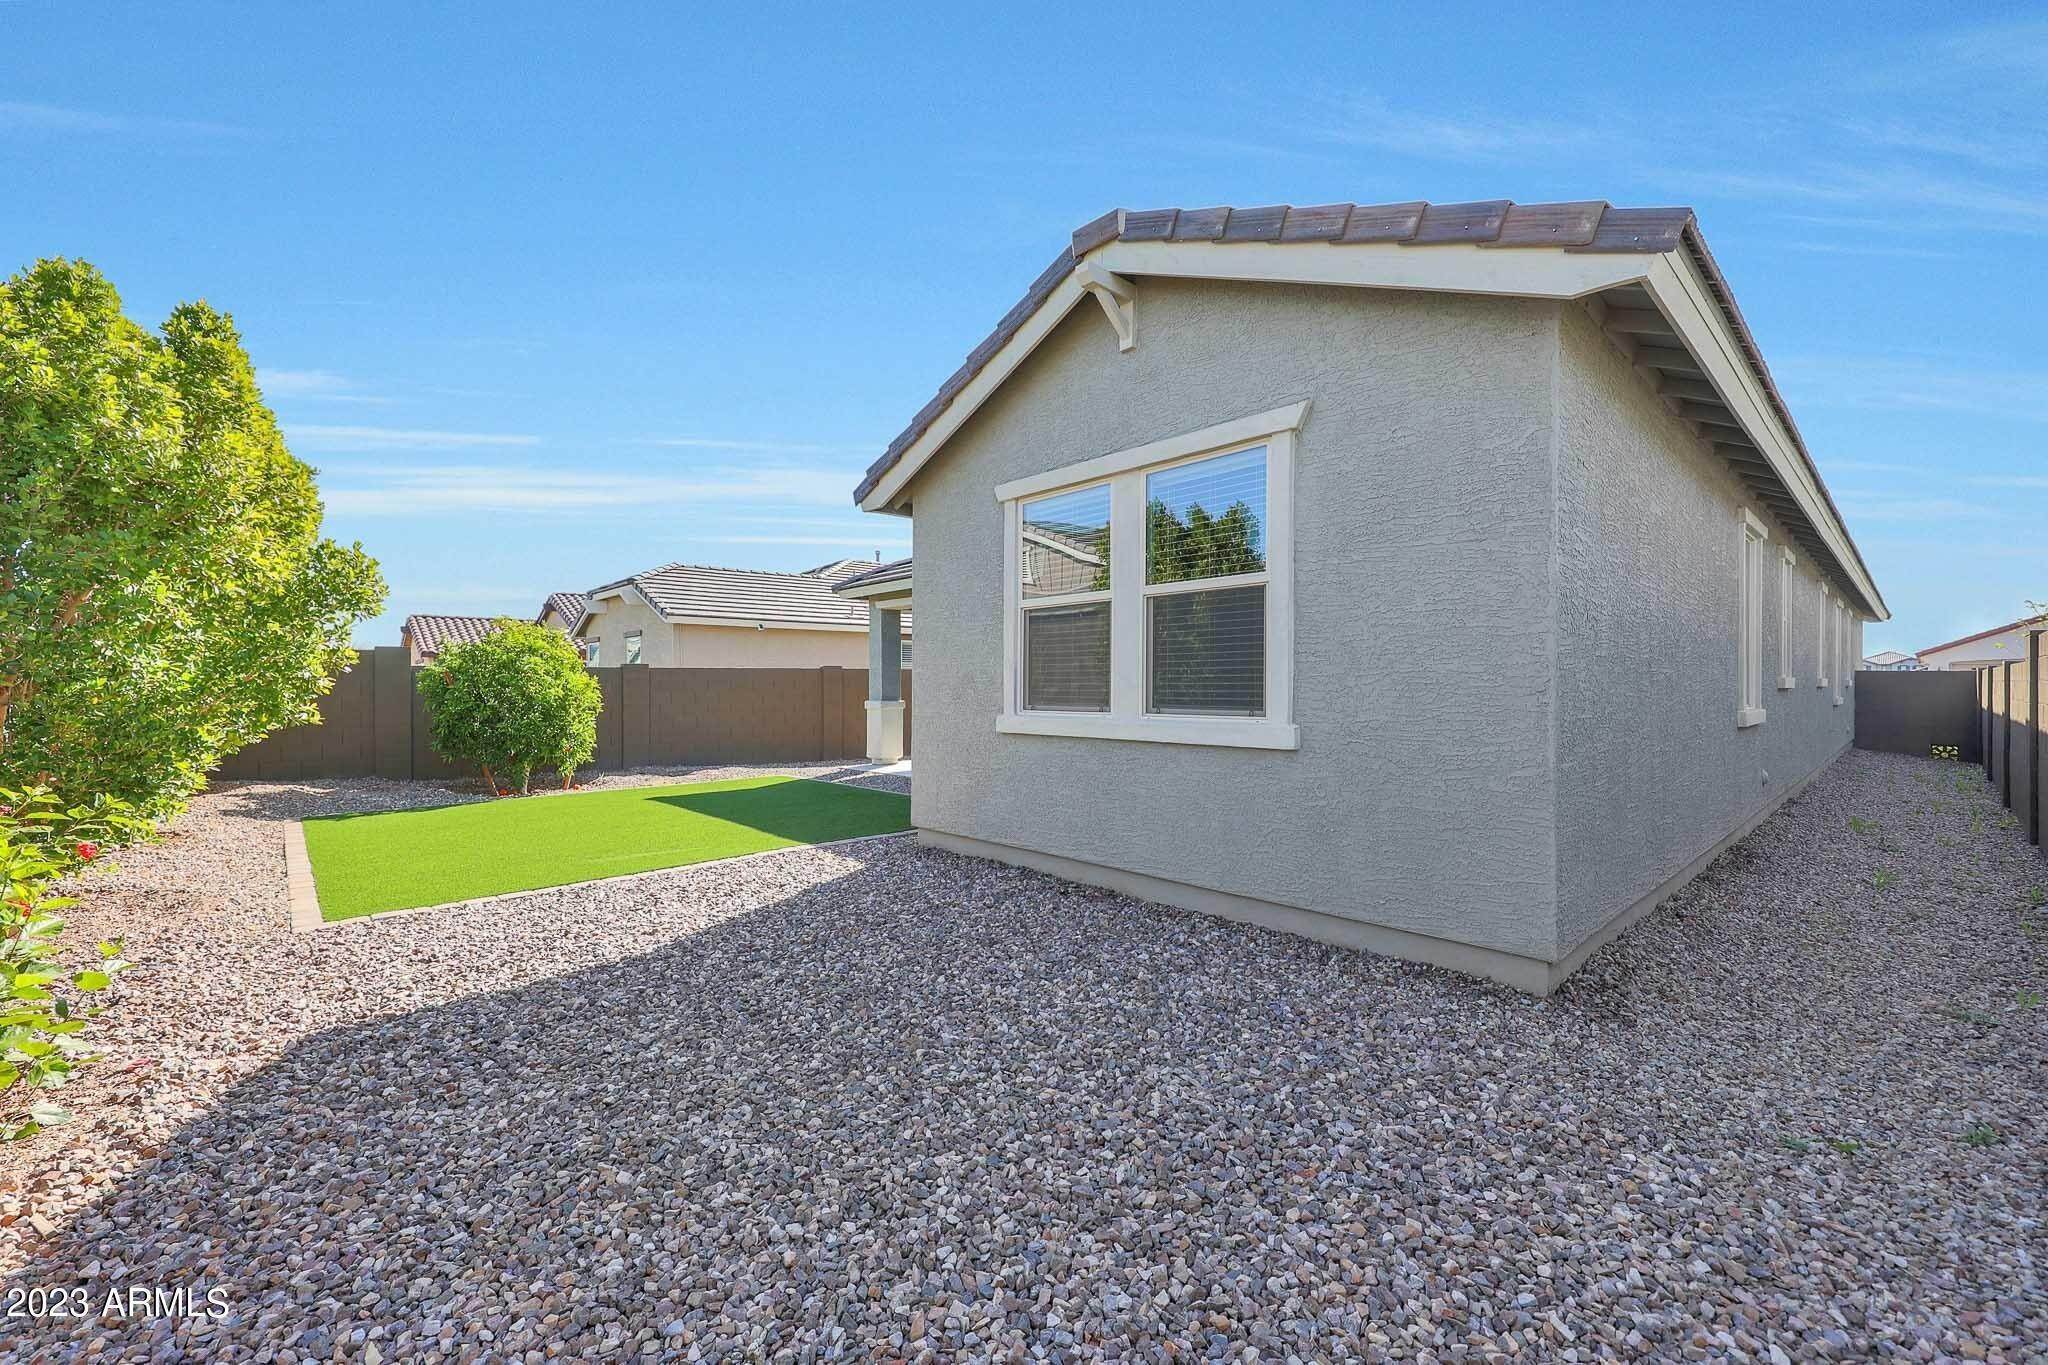 25. Single Family for Sale at Goodyear, AZ 85338